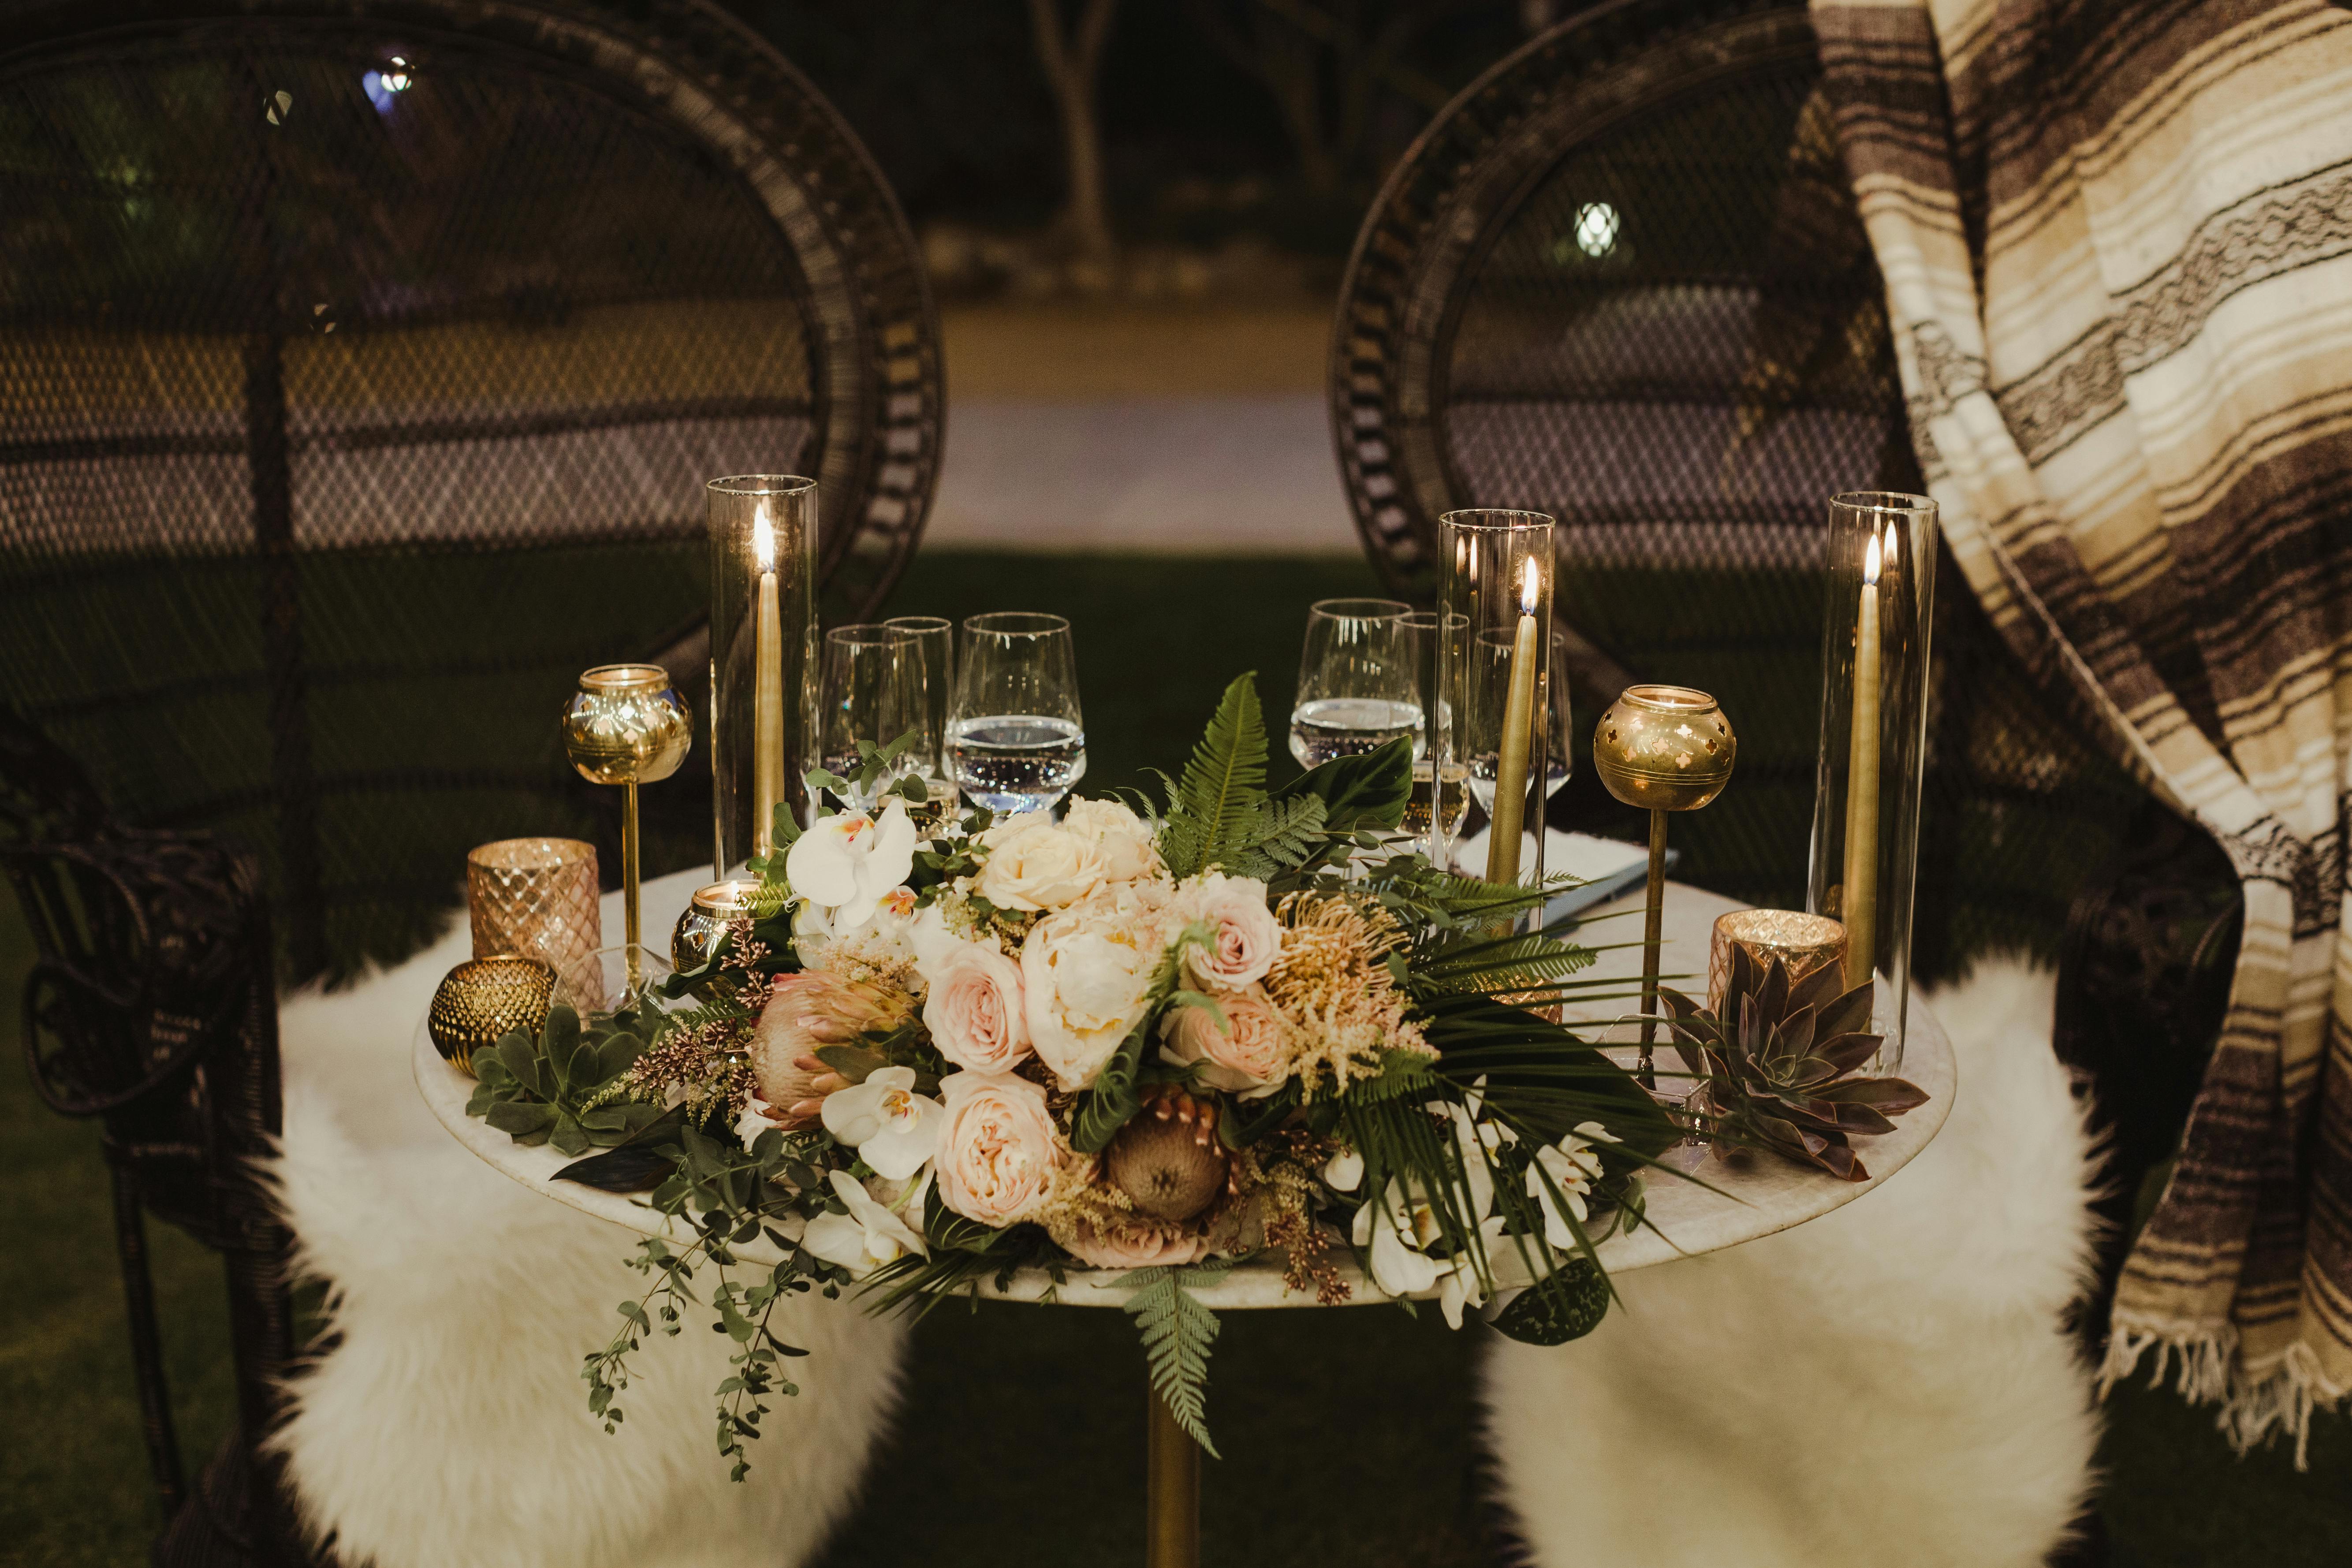 Elegant Desert Wedding at Colony 29 in Palm Springs, CA With Floral and Succulent Wedding Centerpieces and Candle Light.